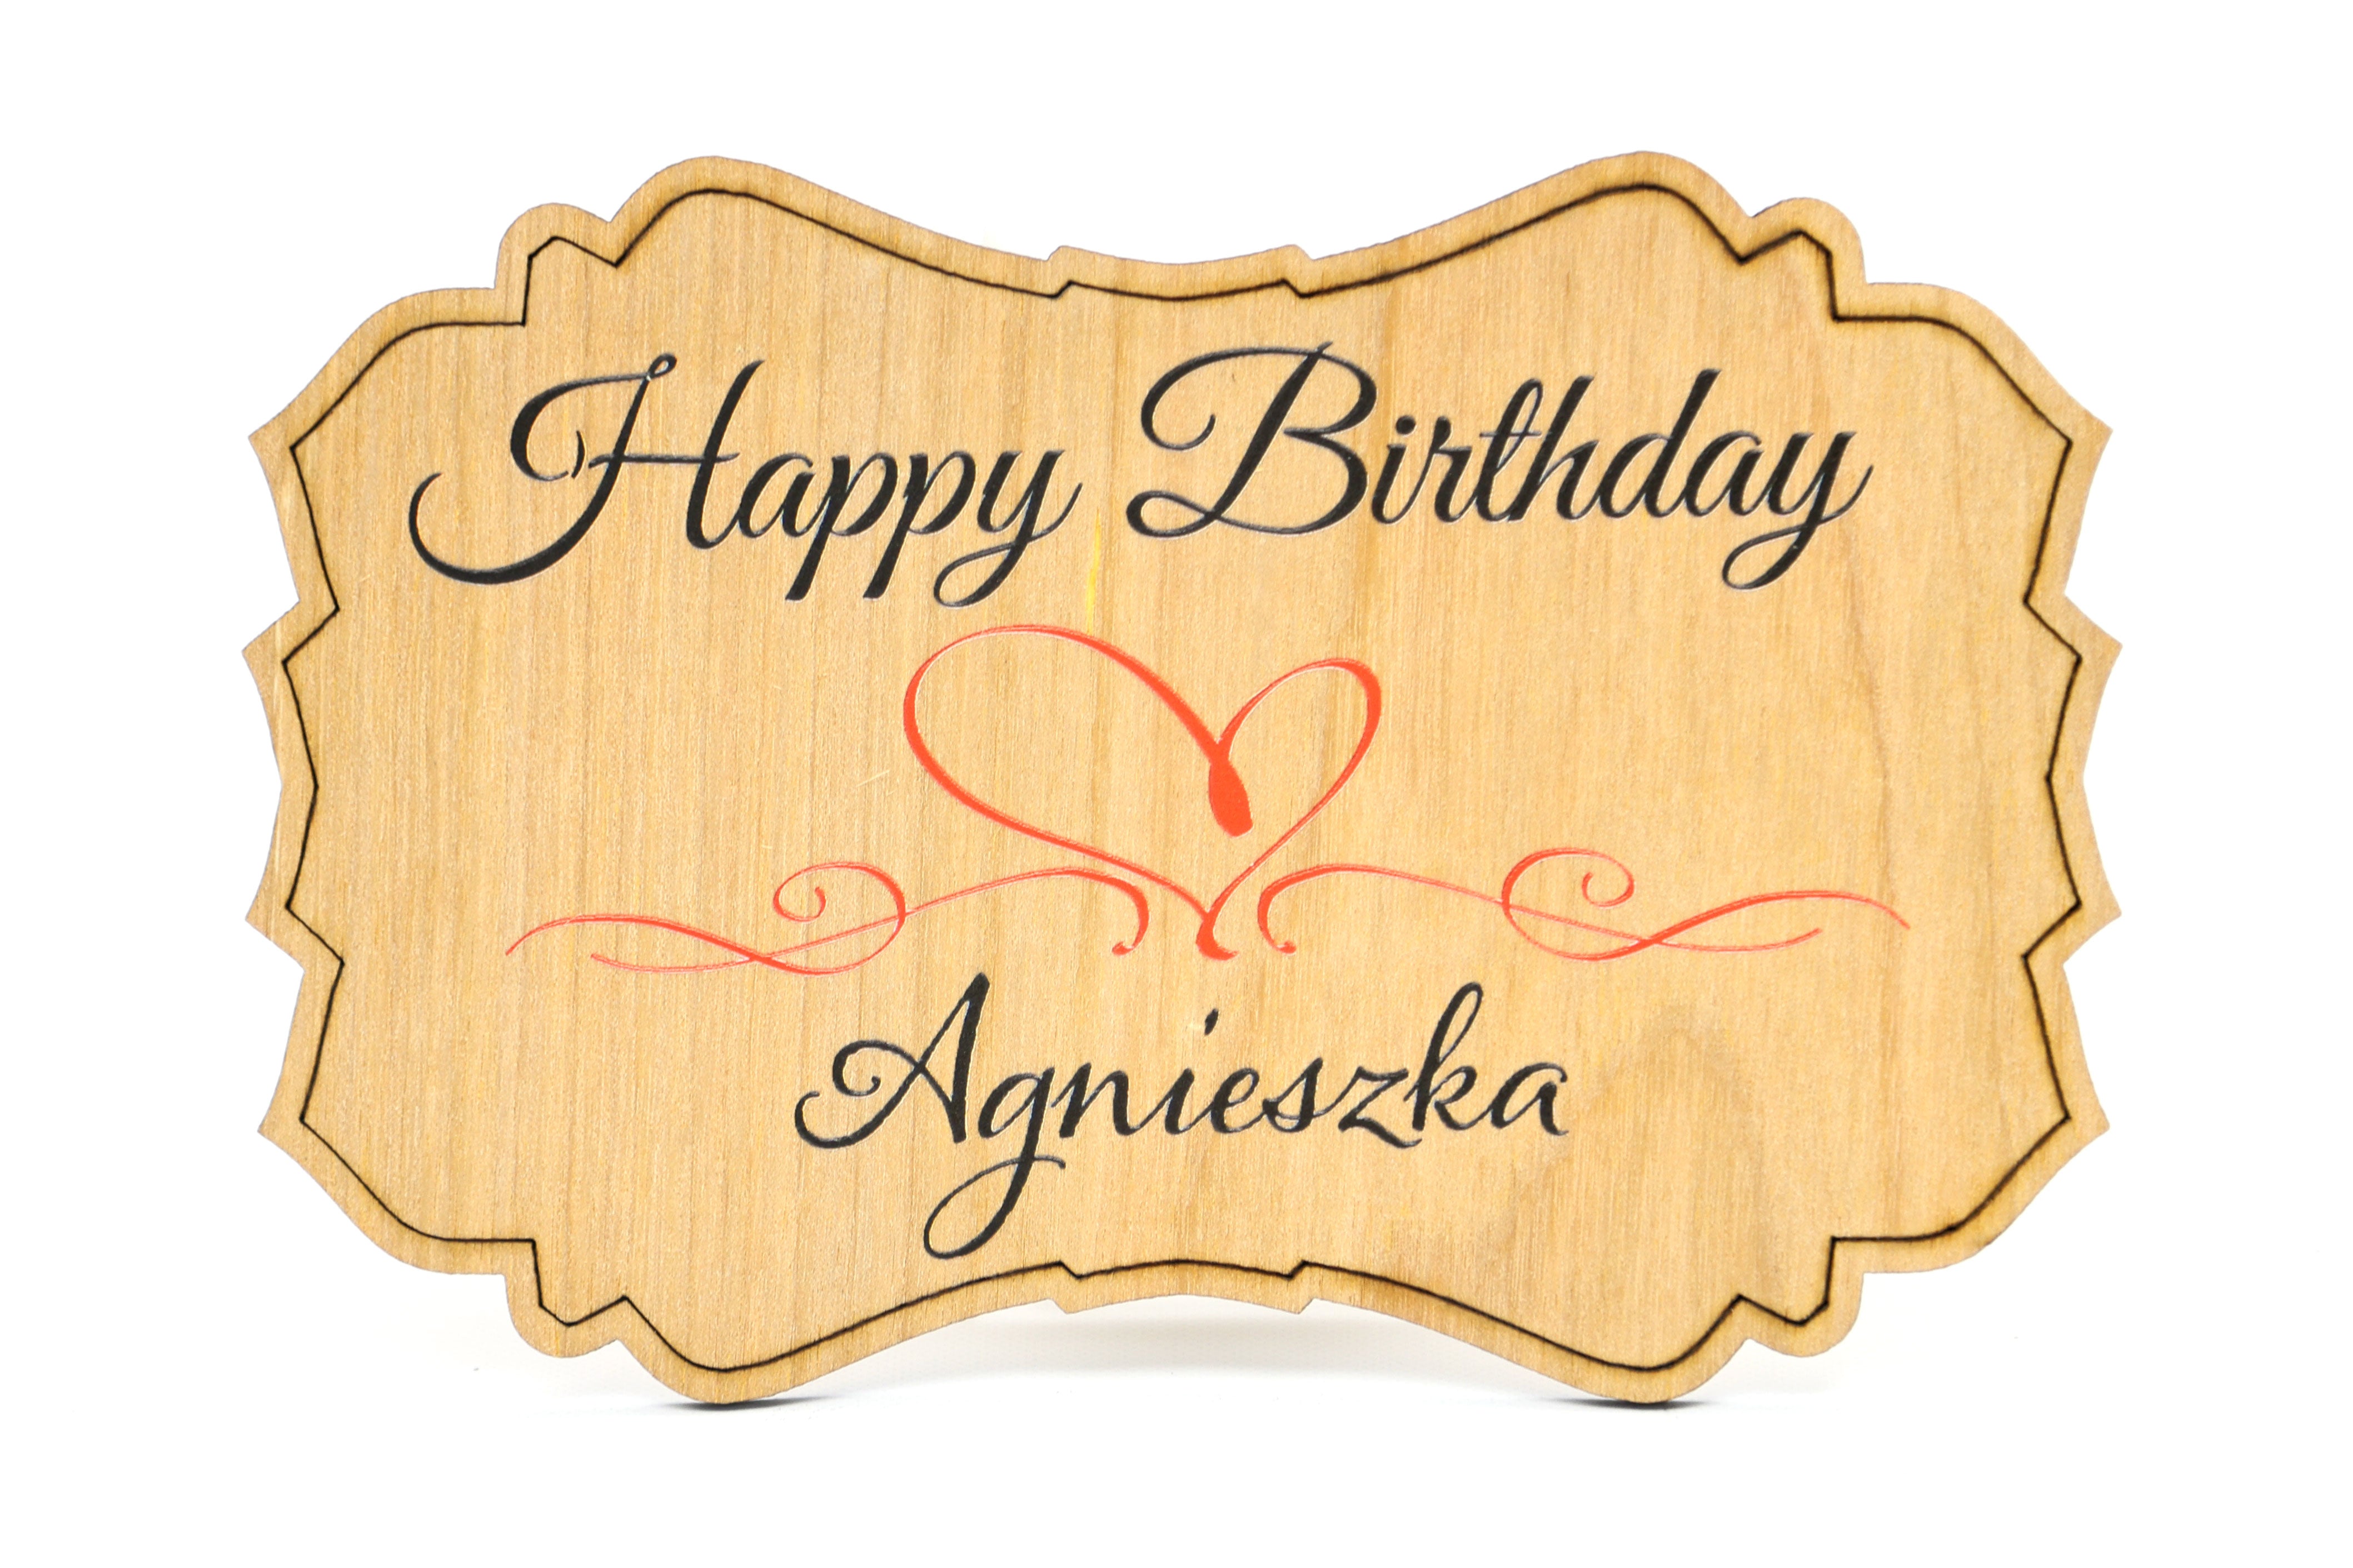 Personalized Birthday Wooden Card